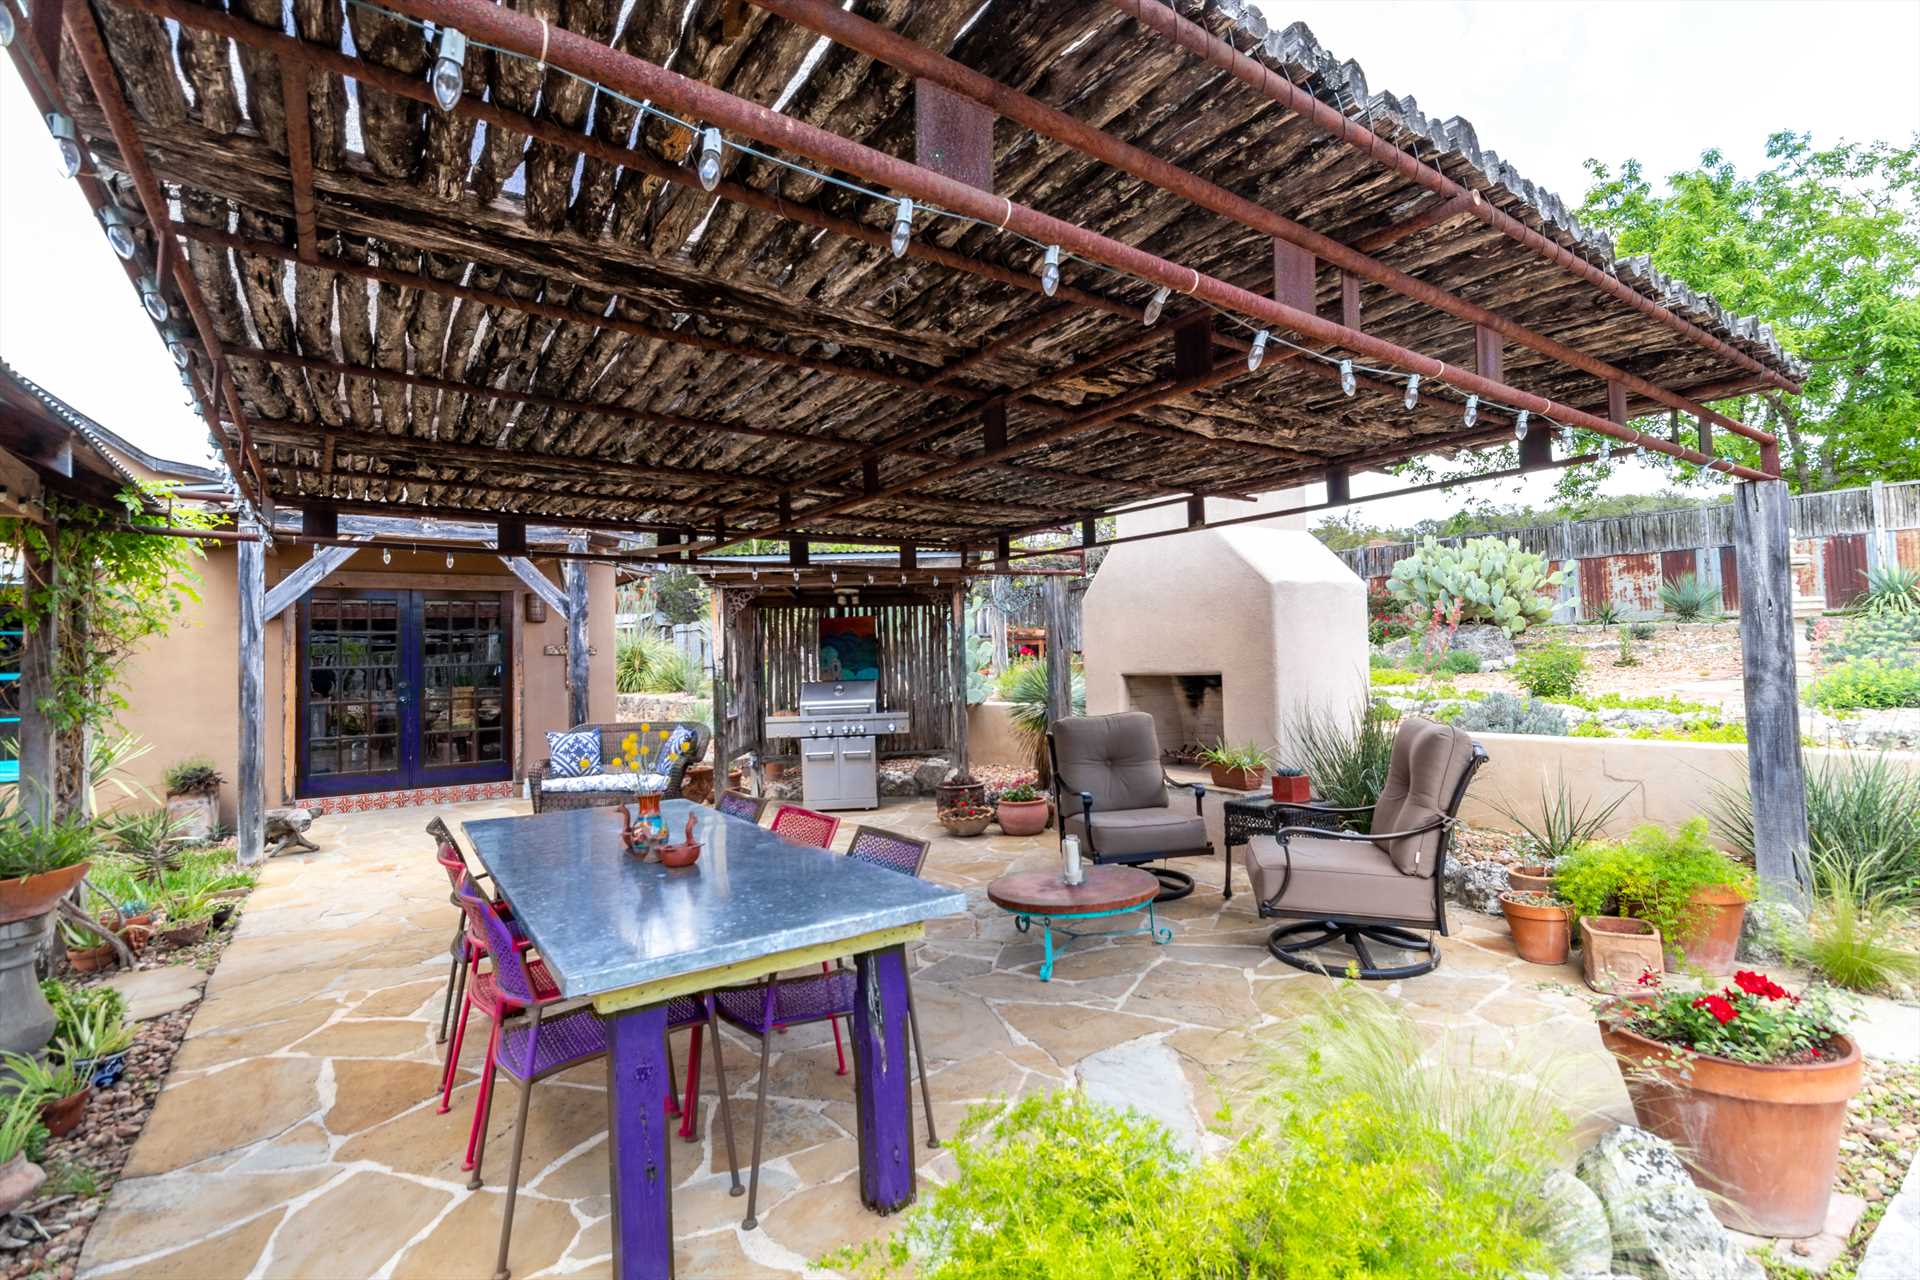                                                 A roomy gas grill and comfortable outdoor dining area are arranged for fantastic and flavorful fresh-air BBQ feasts!